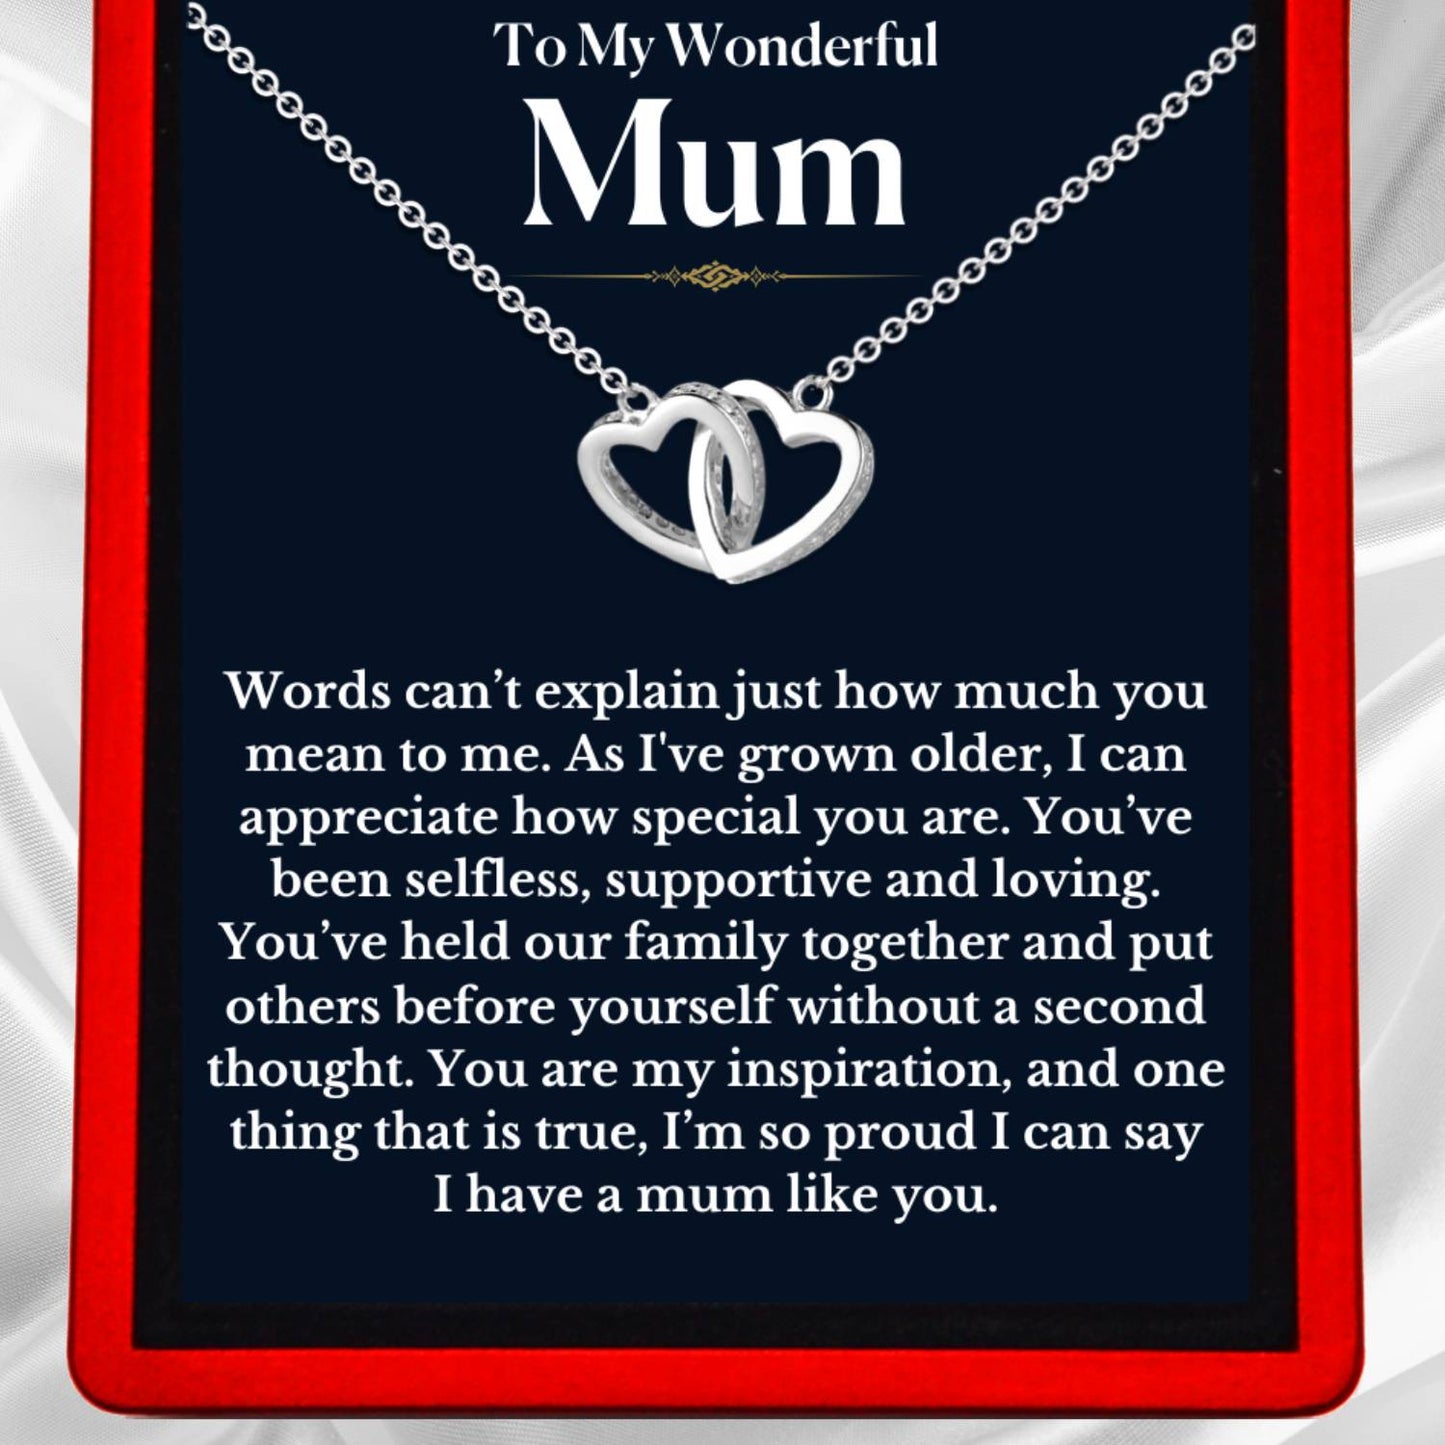 Proud To Have A Mum Like You - Mum30